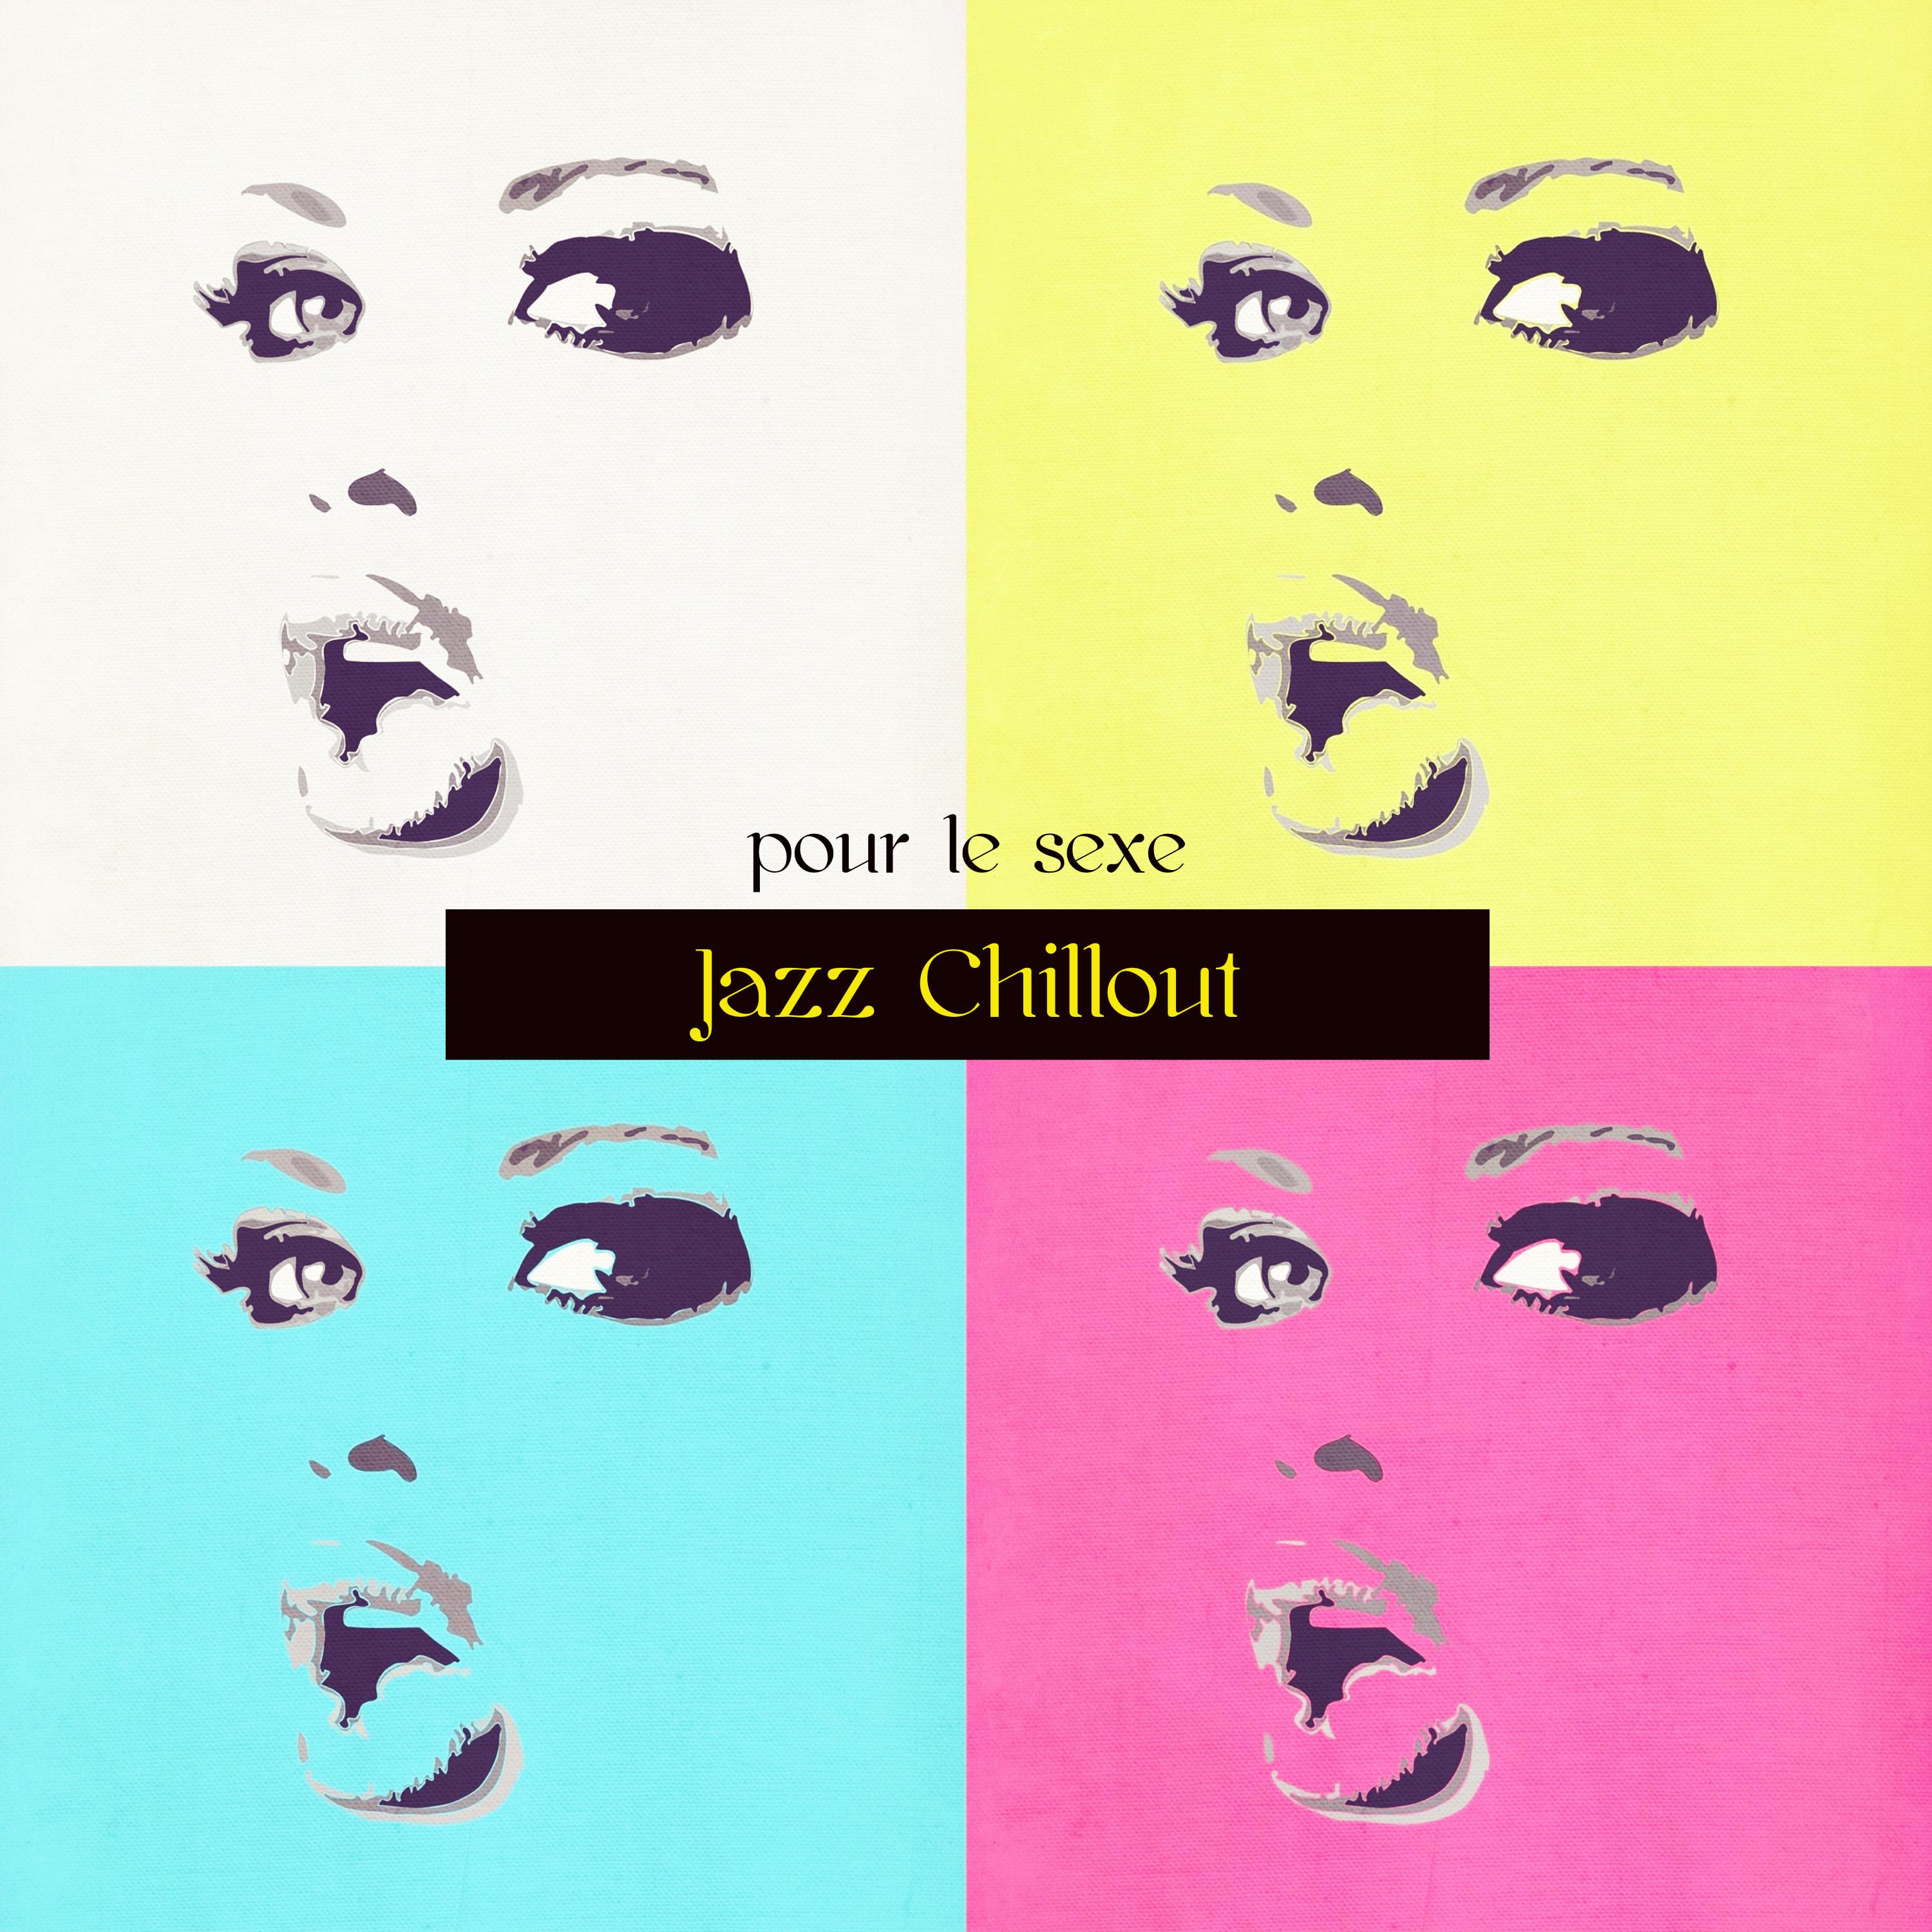 Jazz chillout